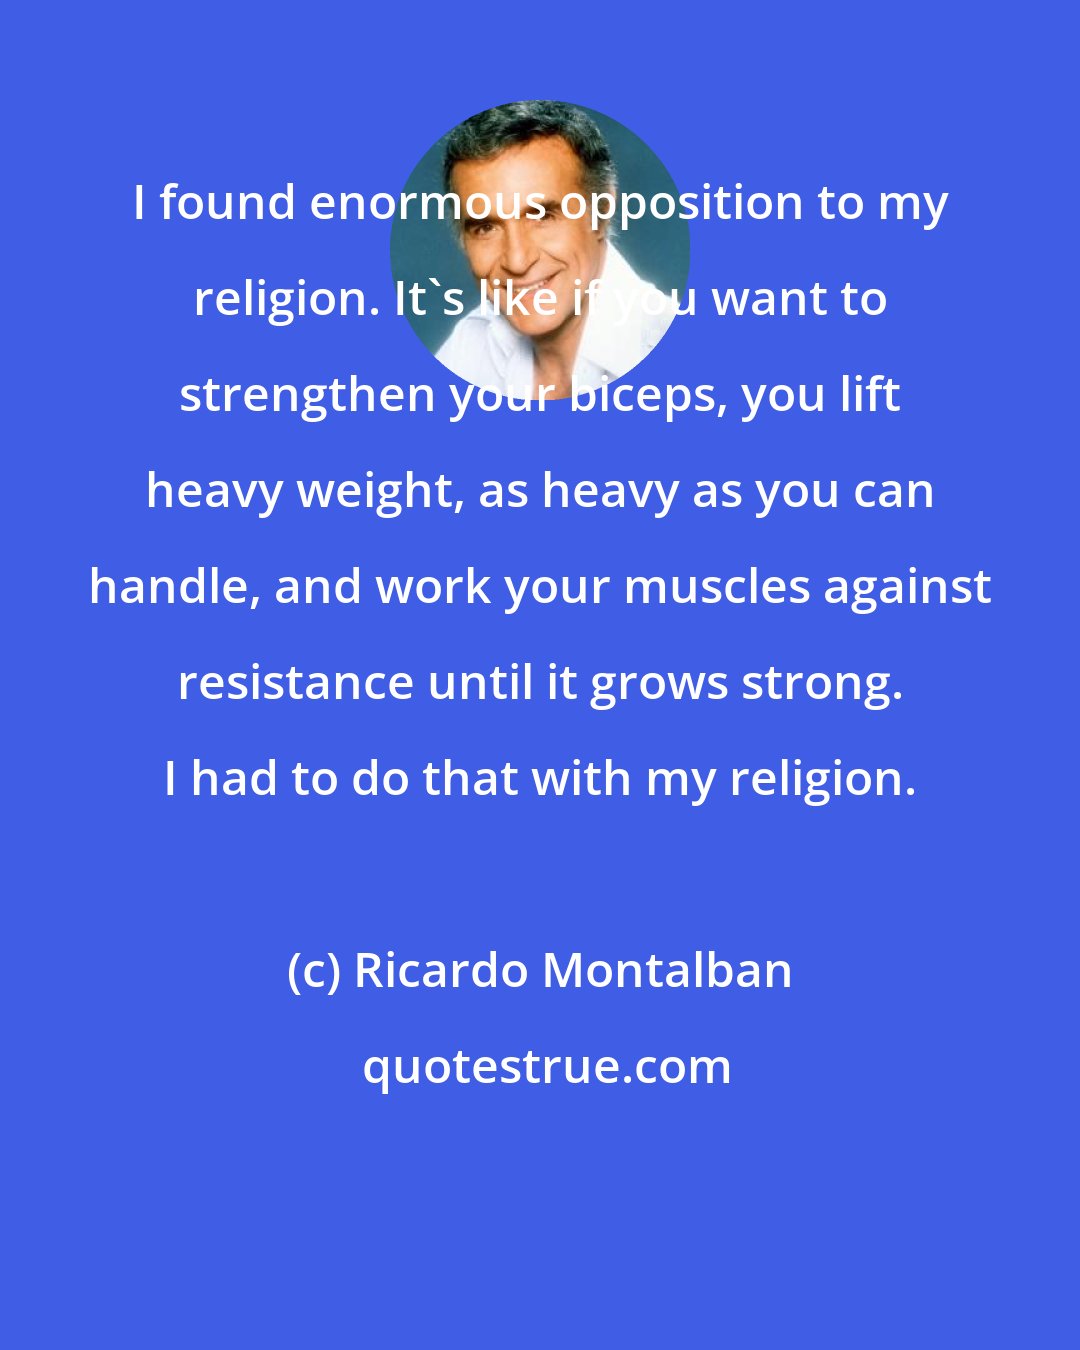 Ricardo Montalban: I found enormous opposition to my religion. It's like if you want to strengthen your biceps, you lift heavy weight, as heavy as you can handle, and work your muscles against resistance until it grows strong. I had to do that with my religion.